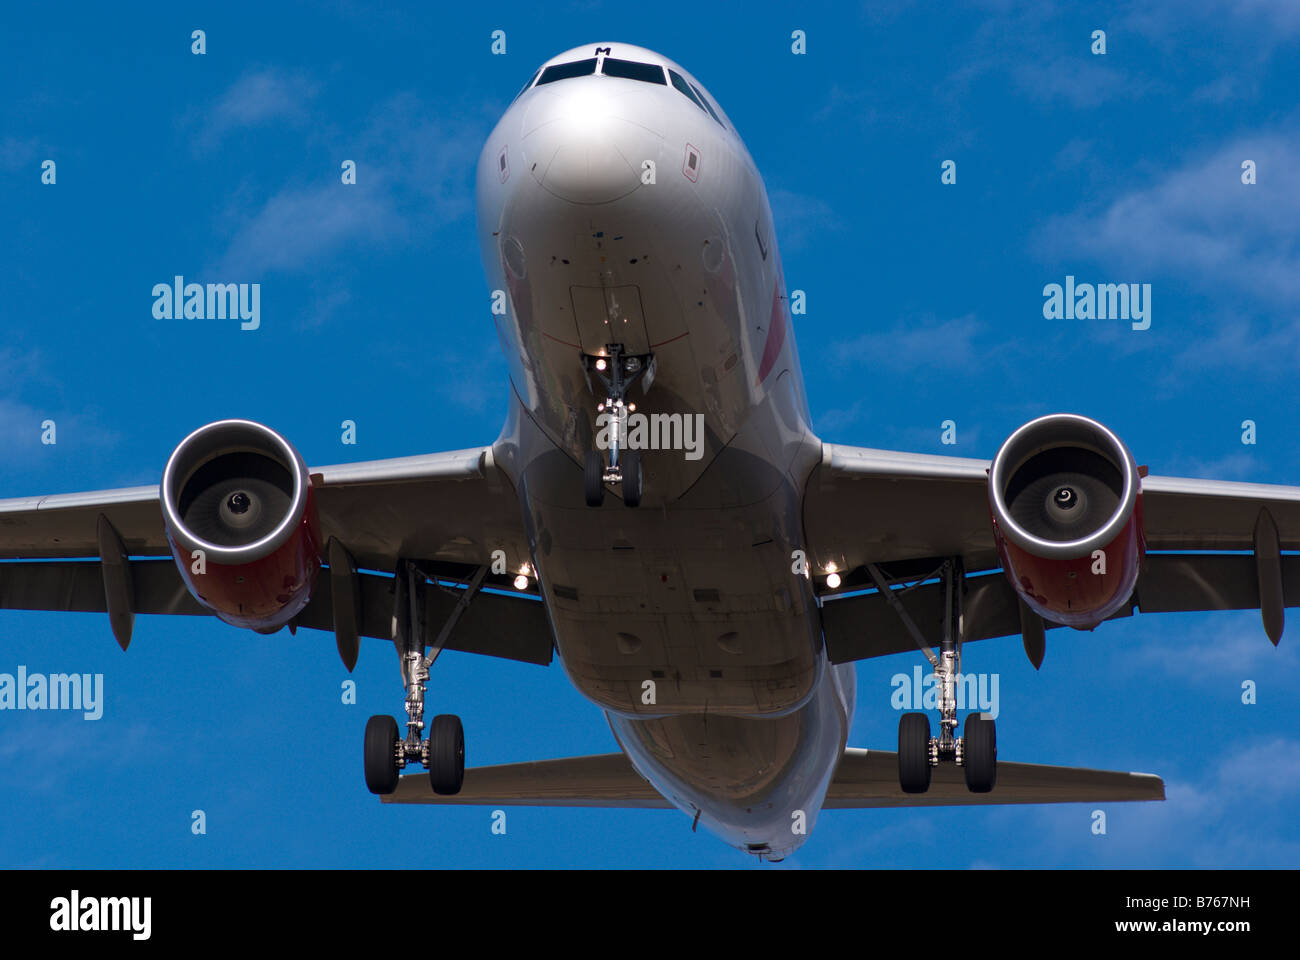 CSA Czech Airlines Airbus A319 jet airliner final approach, with clearly visible landing gear detail,flaps down,under blue sky. Stock Photo